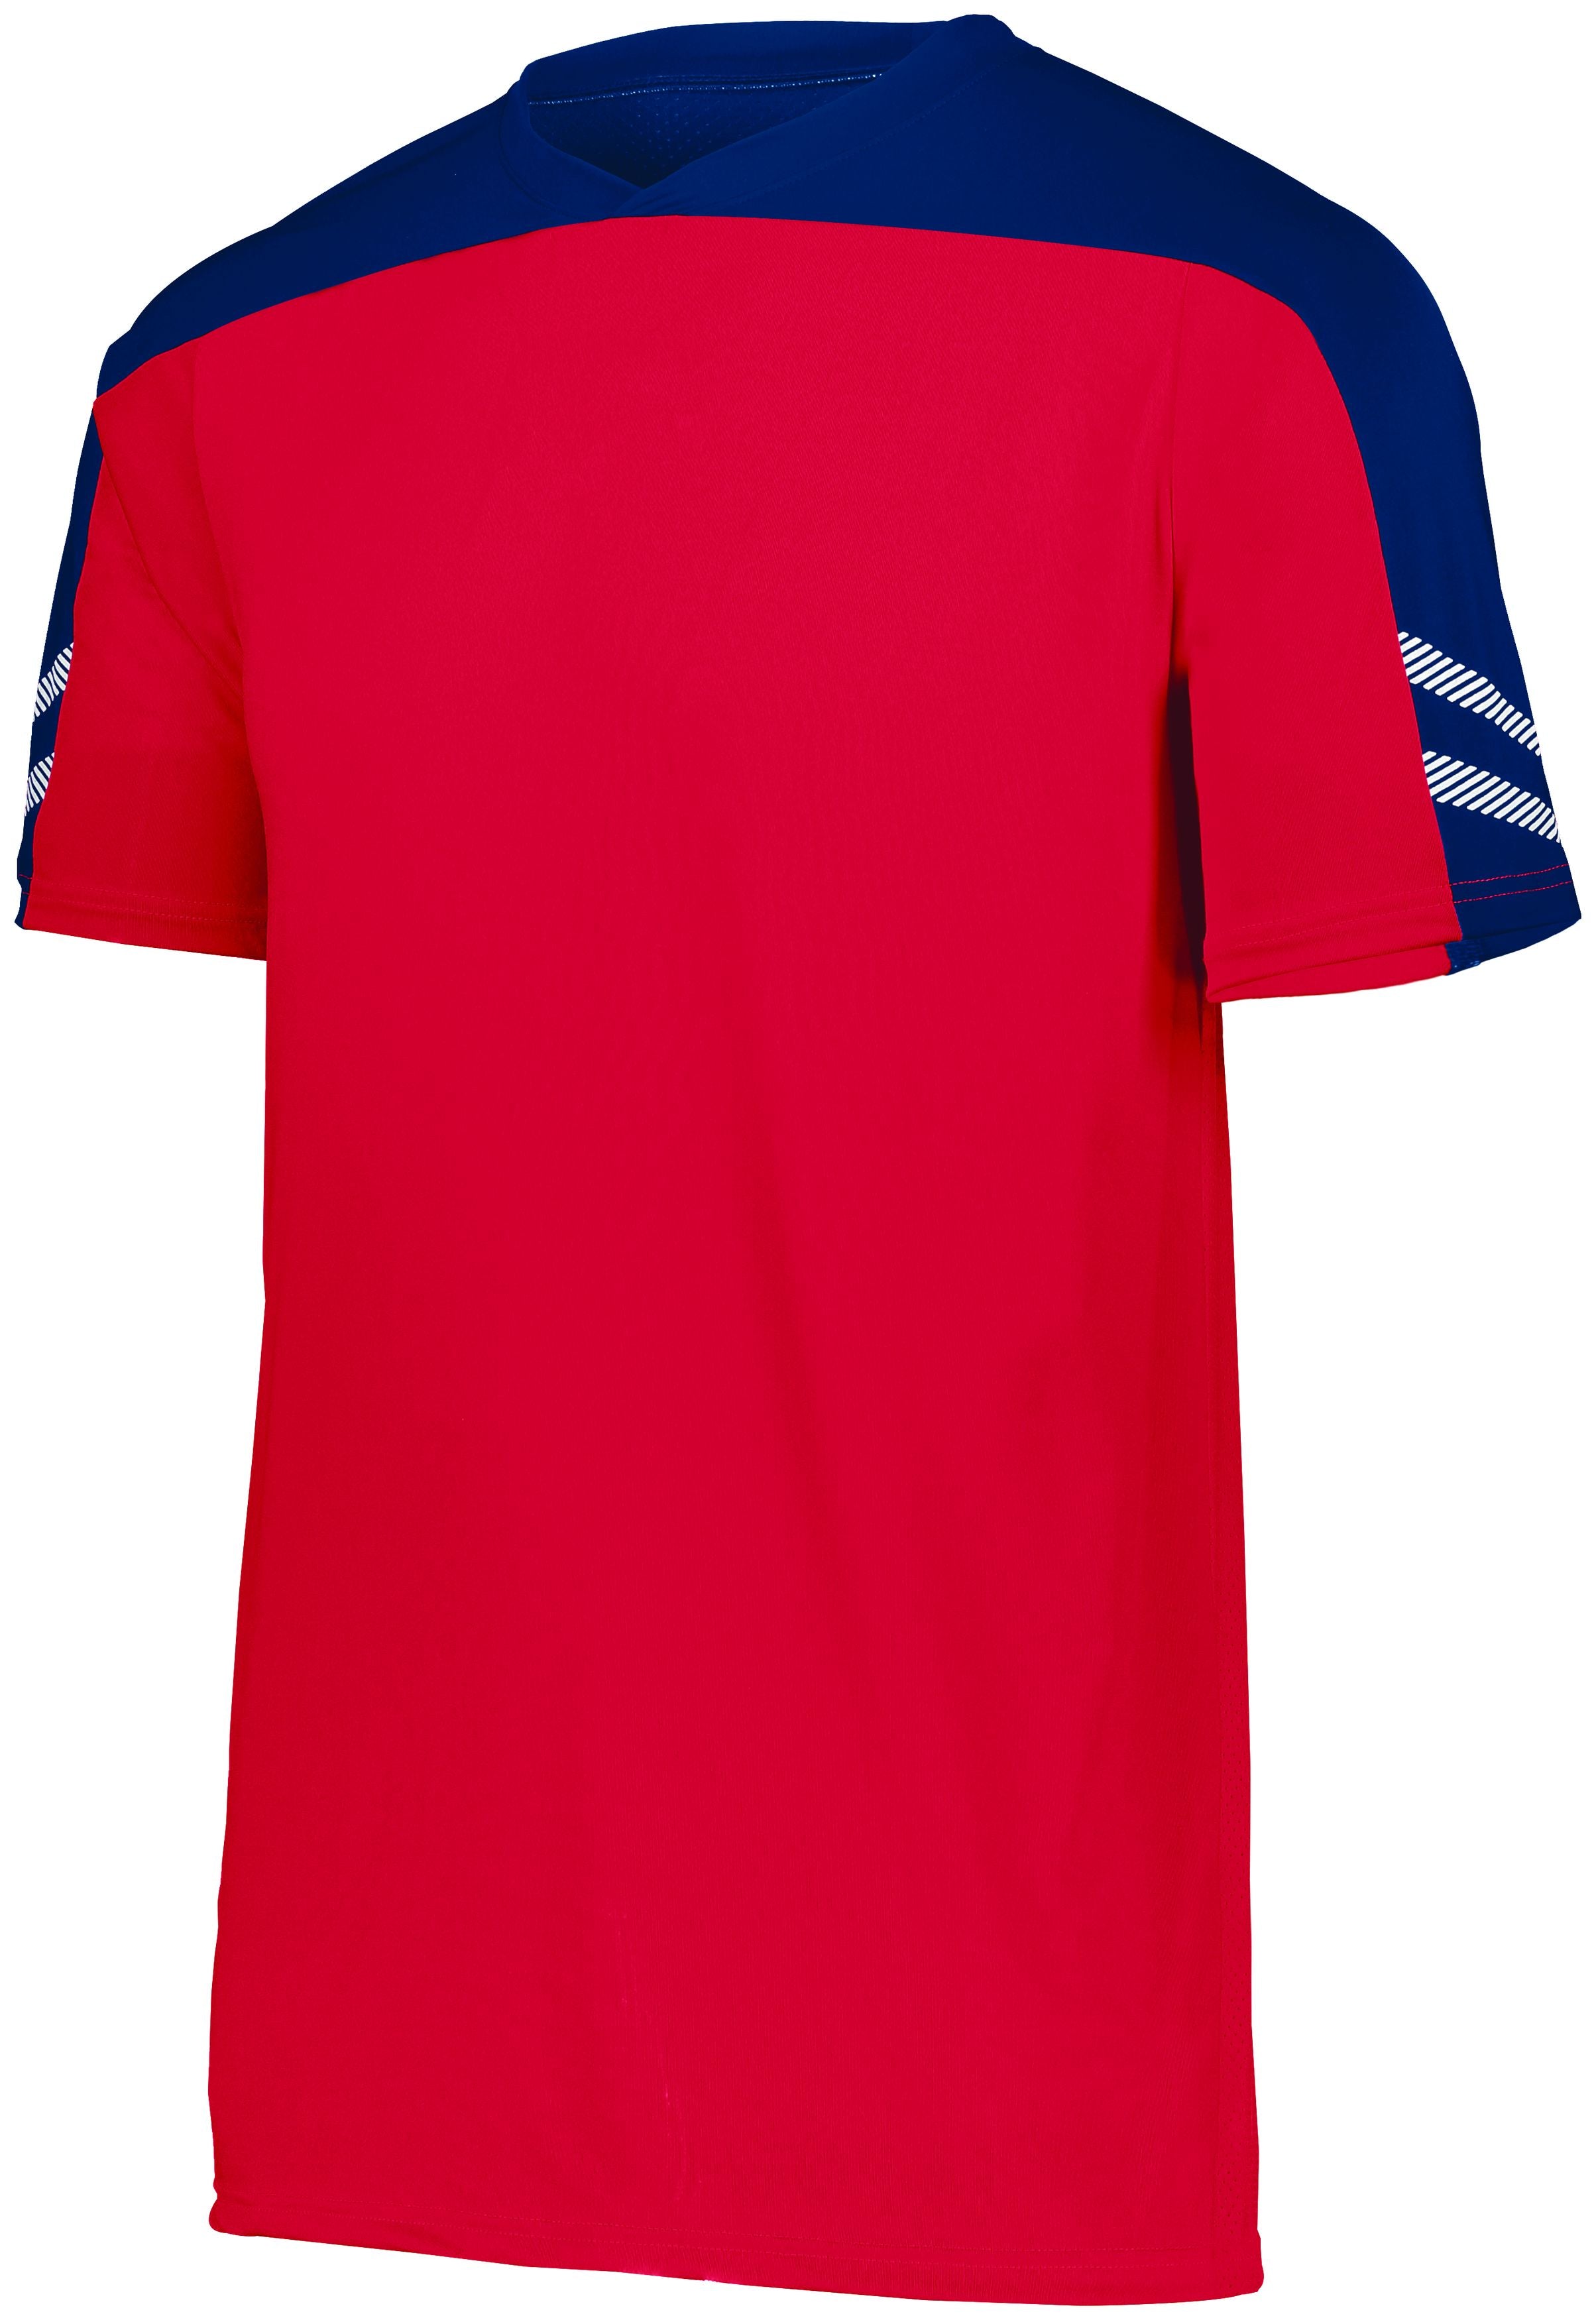 High 5 Youth Anfield Soccer Jersey in Scarlet/Navy/White  -Part of the Youth, Youth-Jersey, High5-Products, Soccer, Shirts, All-Sports-1 product lines at KanaleyCreations.com